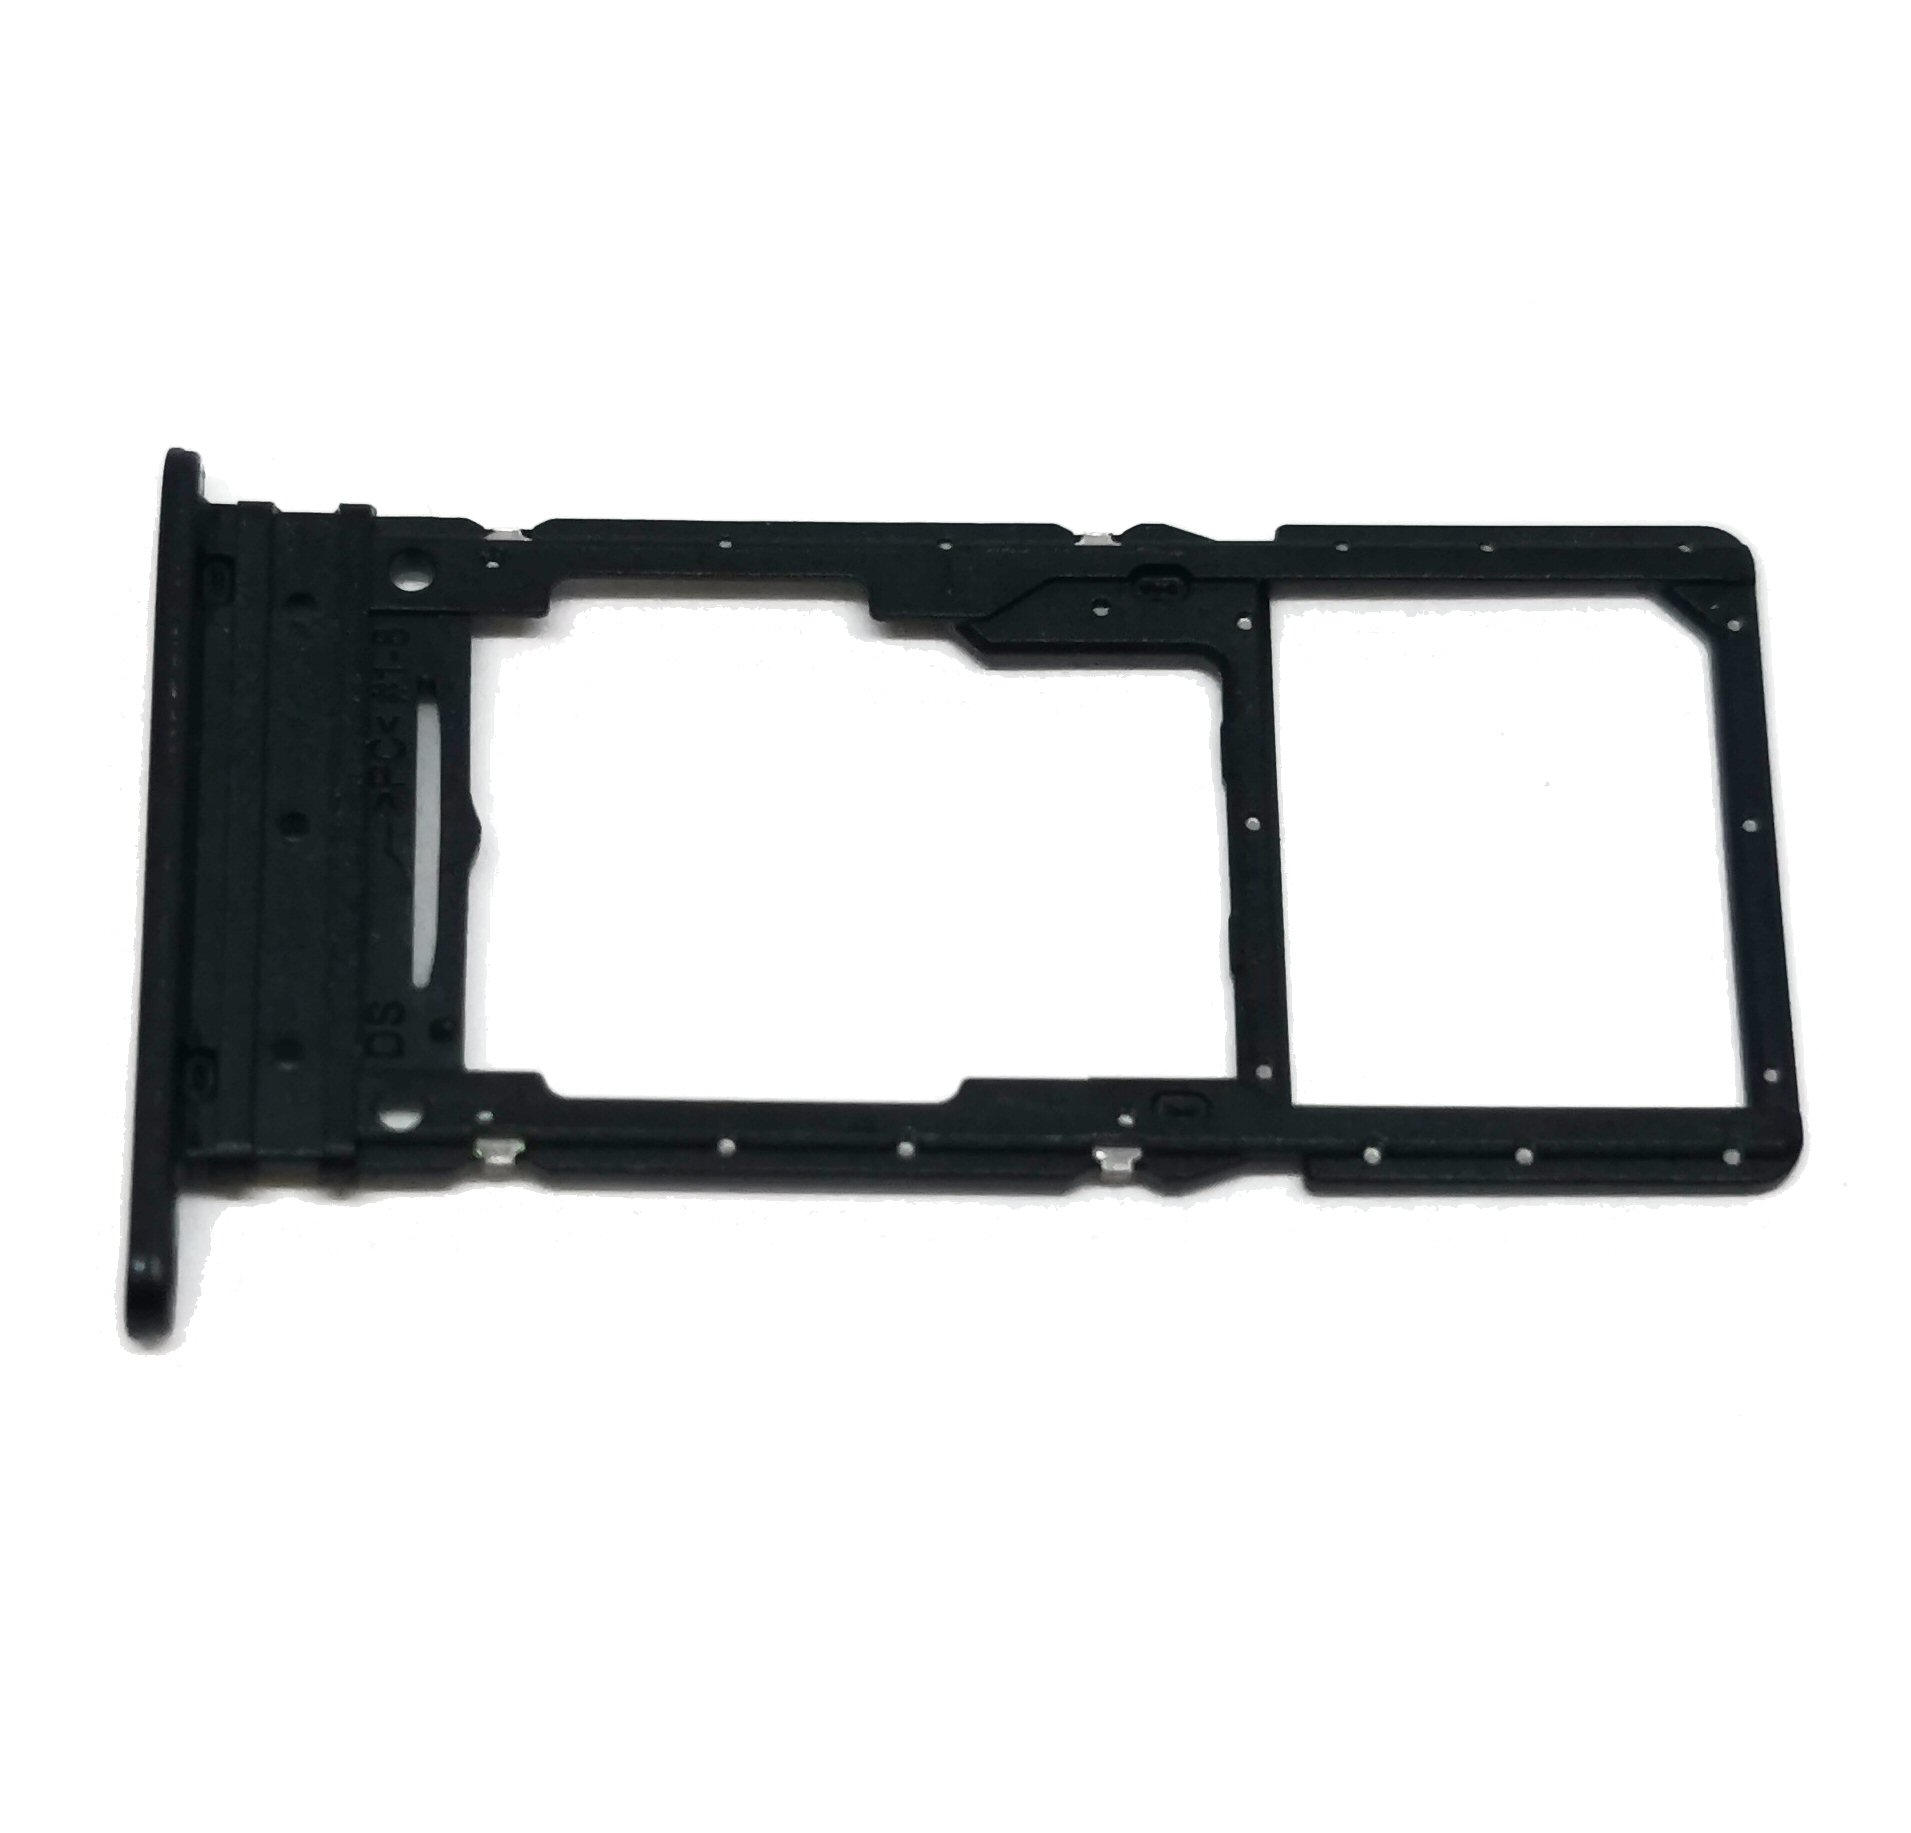 REPLACEMENT PART - Use this part to replace a missing sim tray on your ...